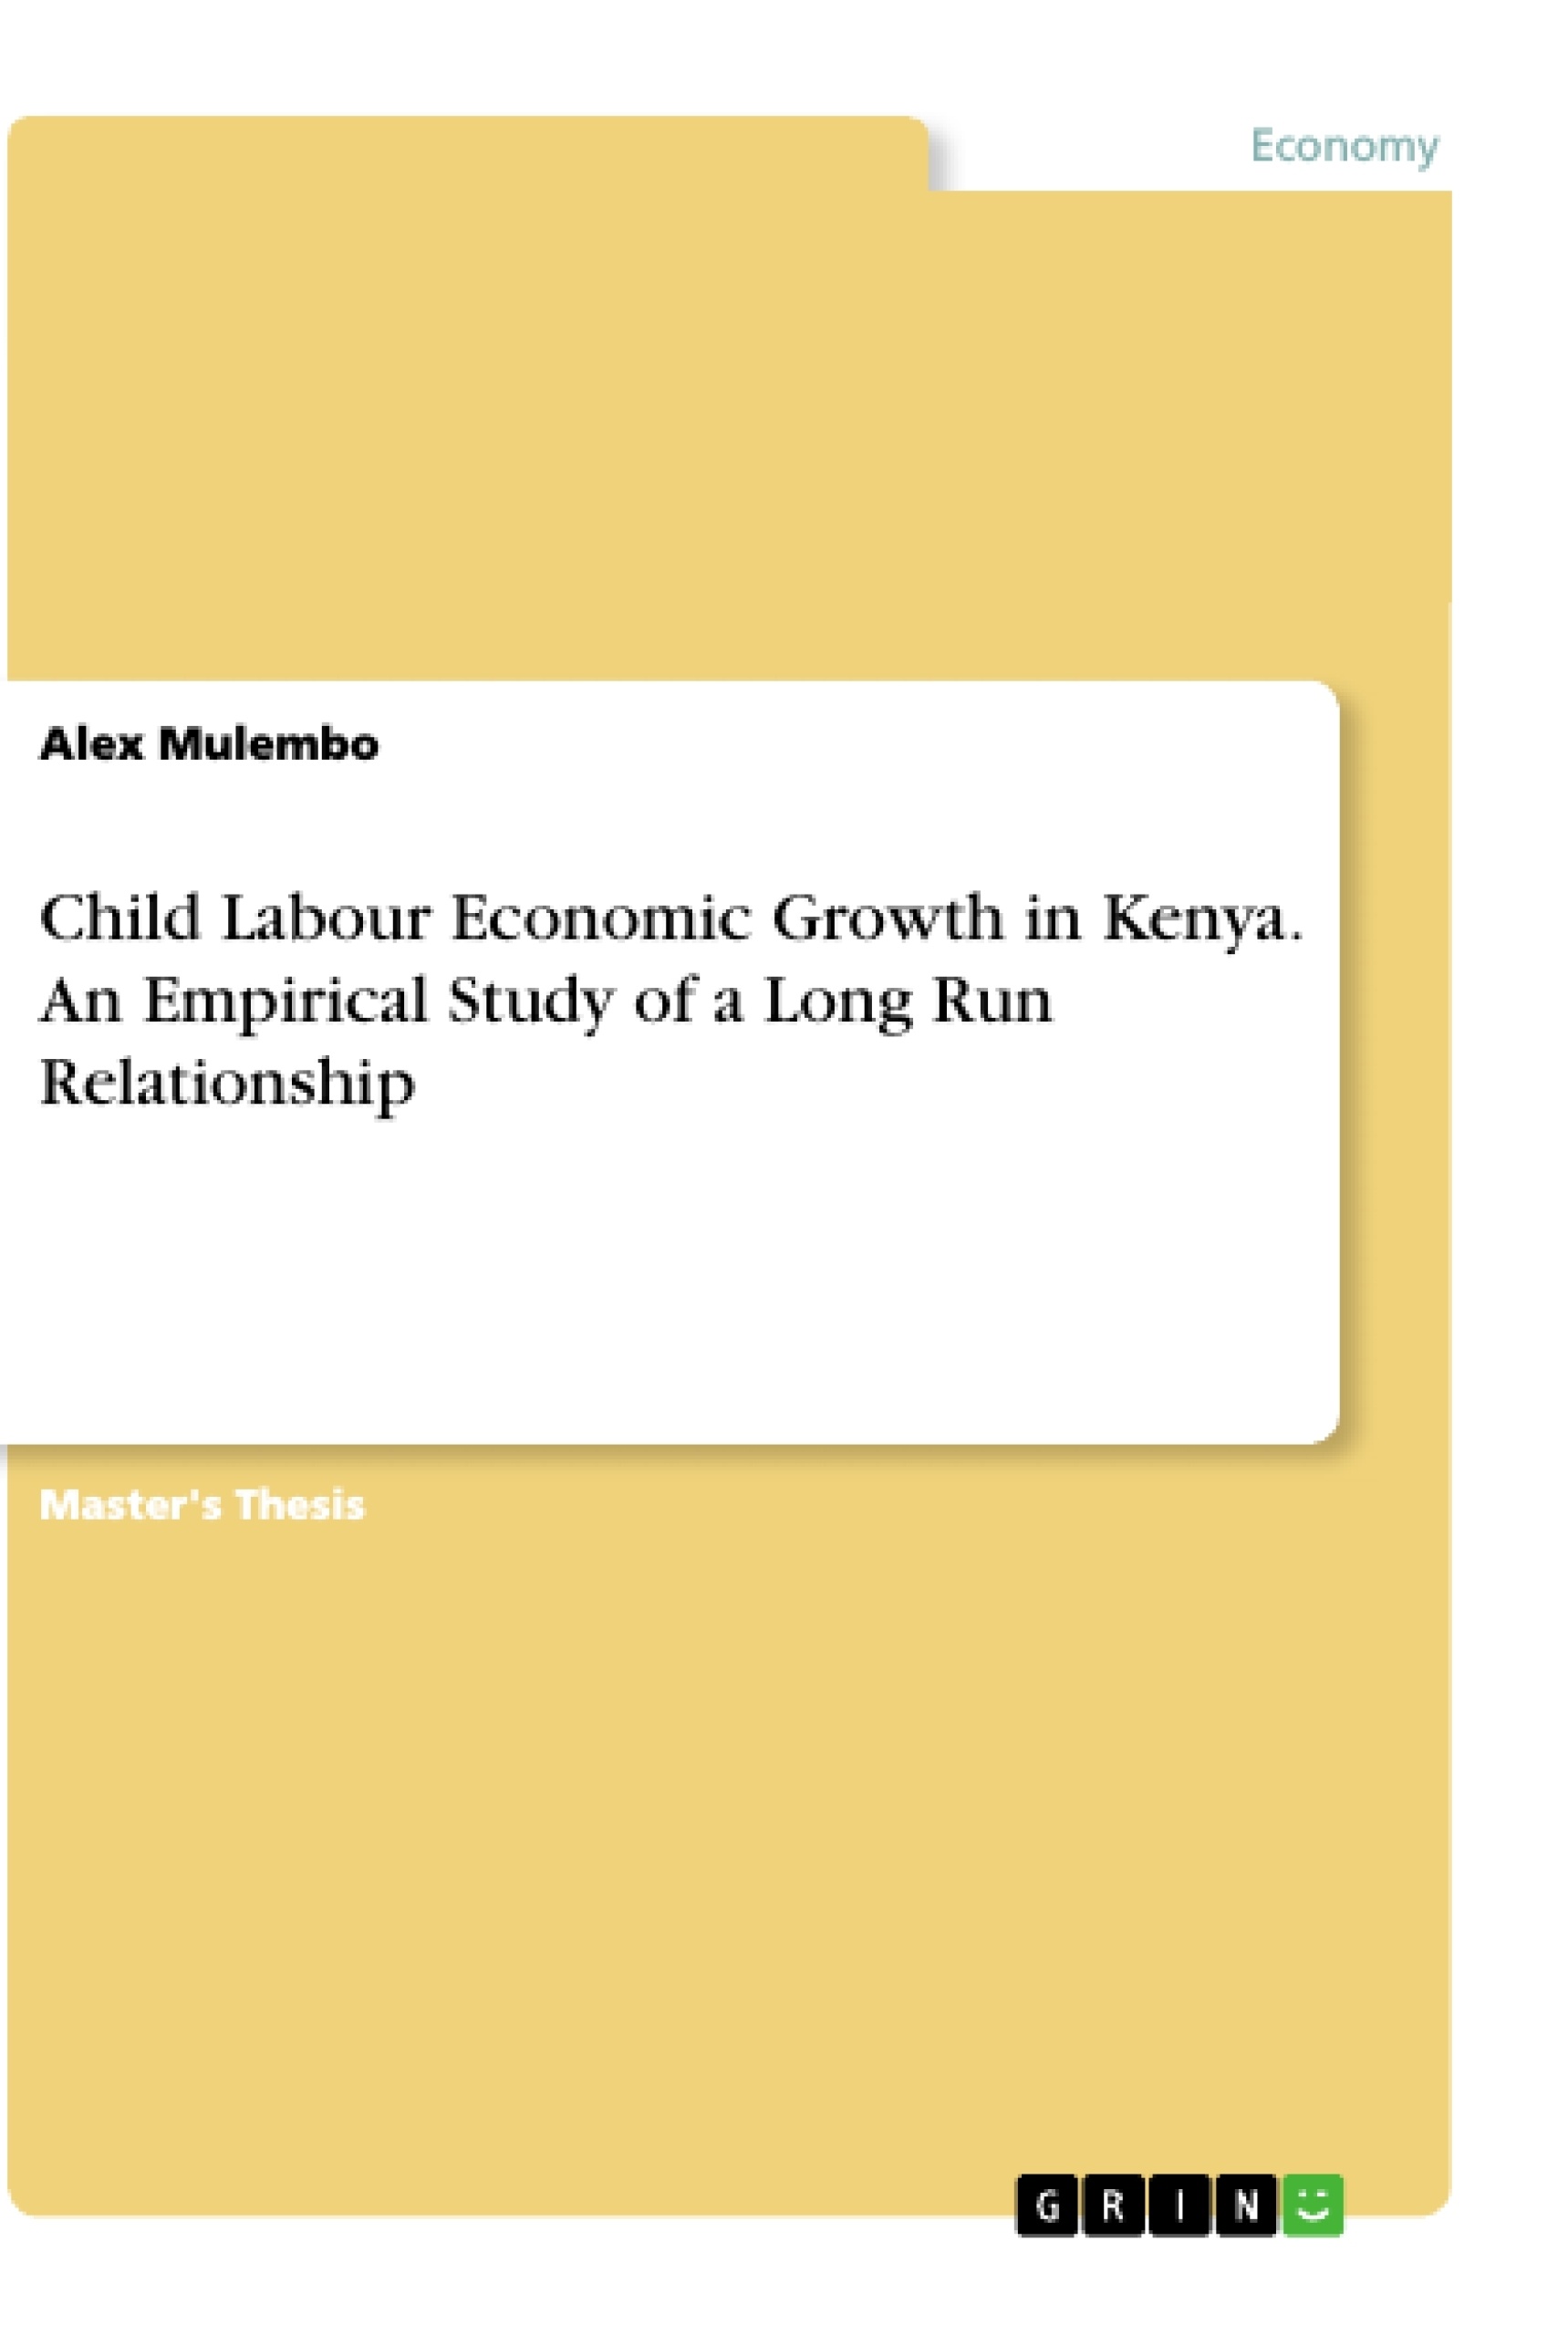 Title: Child Labour Economic Growth in Kenya. An Empirical Study of a Long Run Relationship